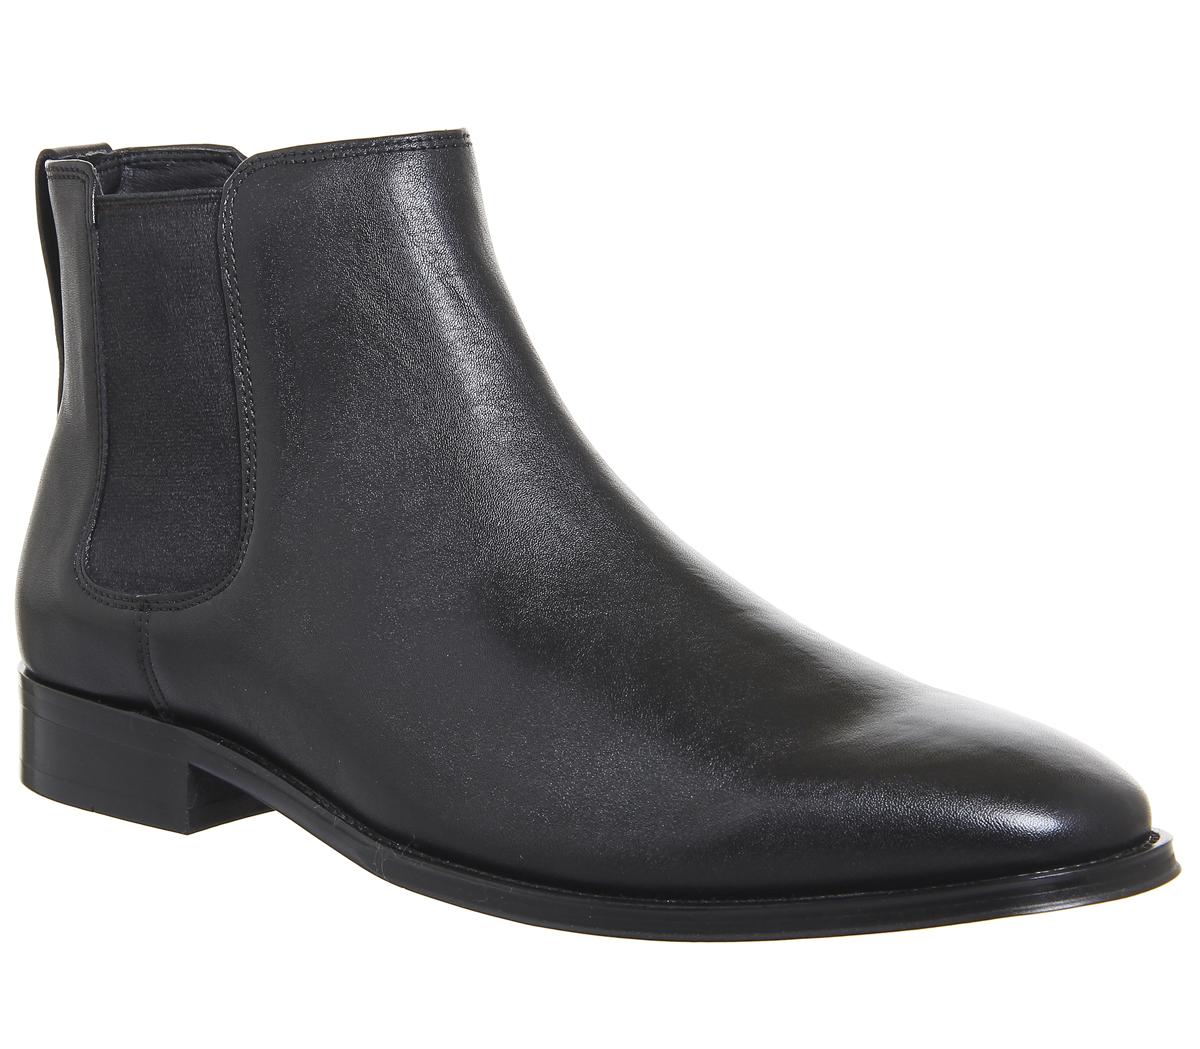 OFFICEGangway Square Toe Chelsea BootsBlack Leather